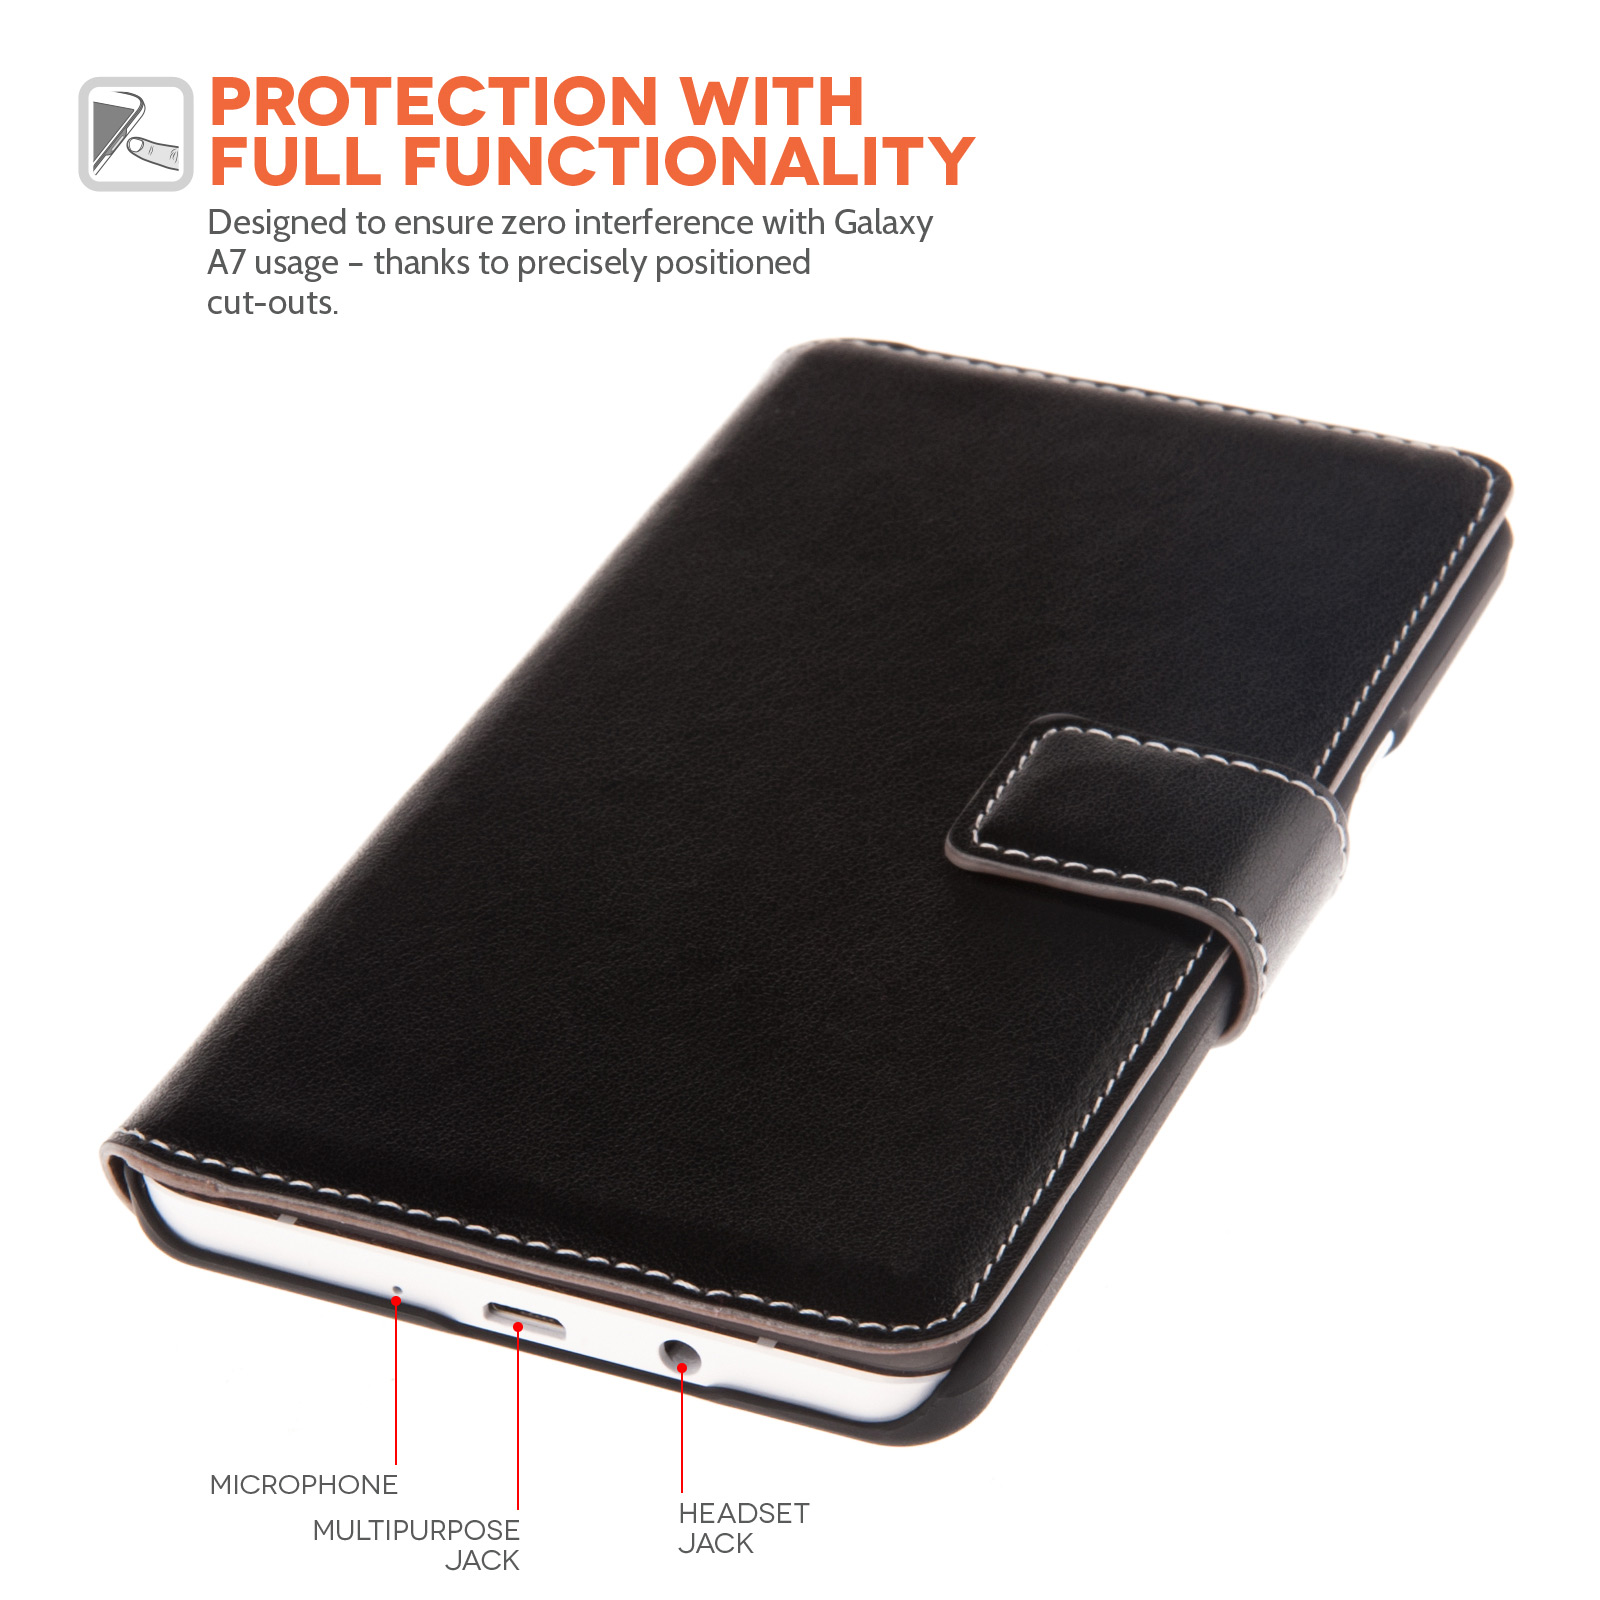 YouSave Samsung Galaxy A7 Leather-Effect Stand Wallet Case - Black